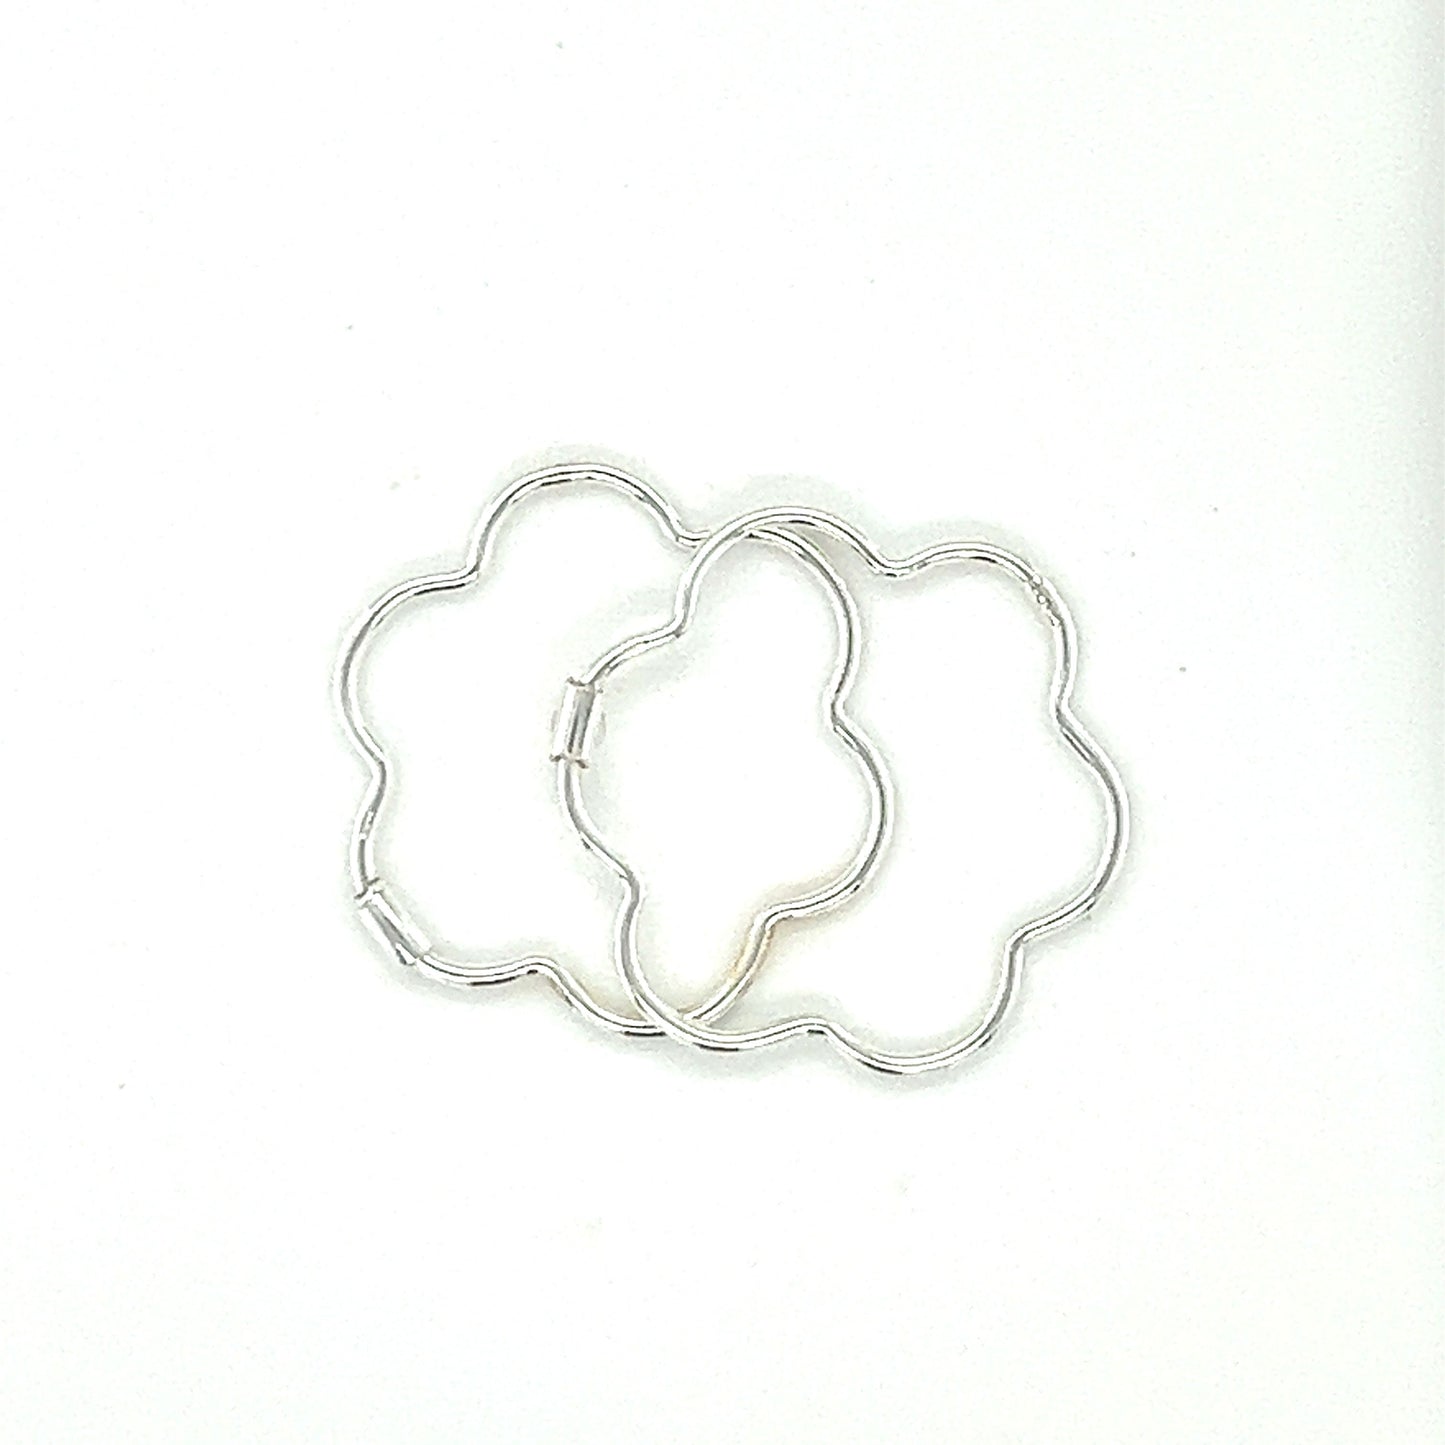 A minimalist Super Silver Delicate Flower Shaped Hoops displayed on a white surface.